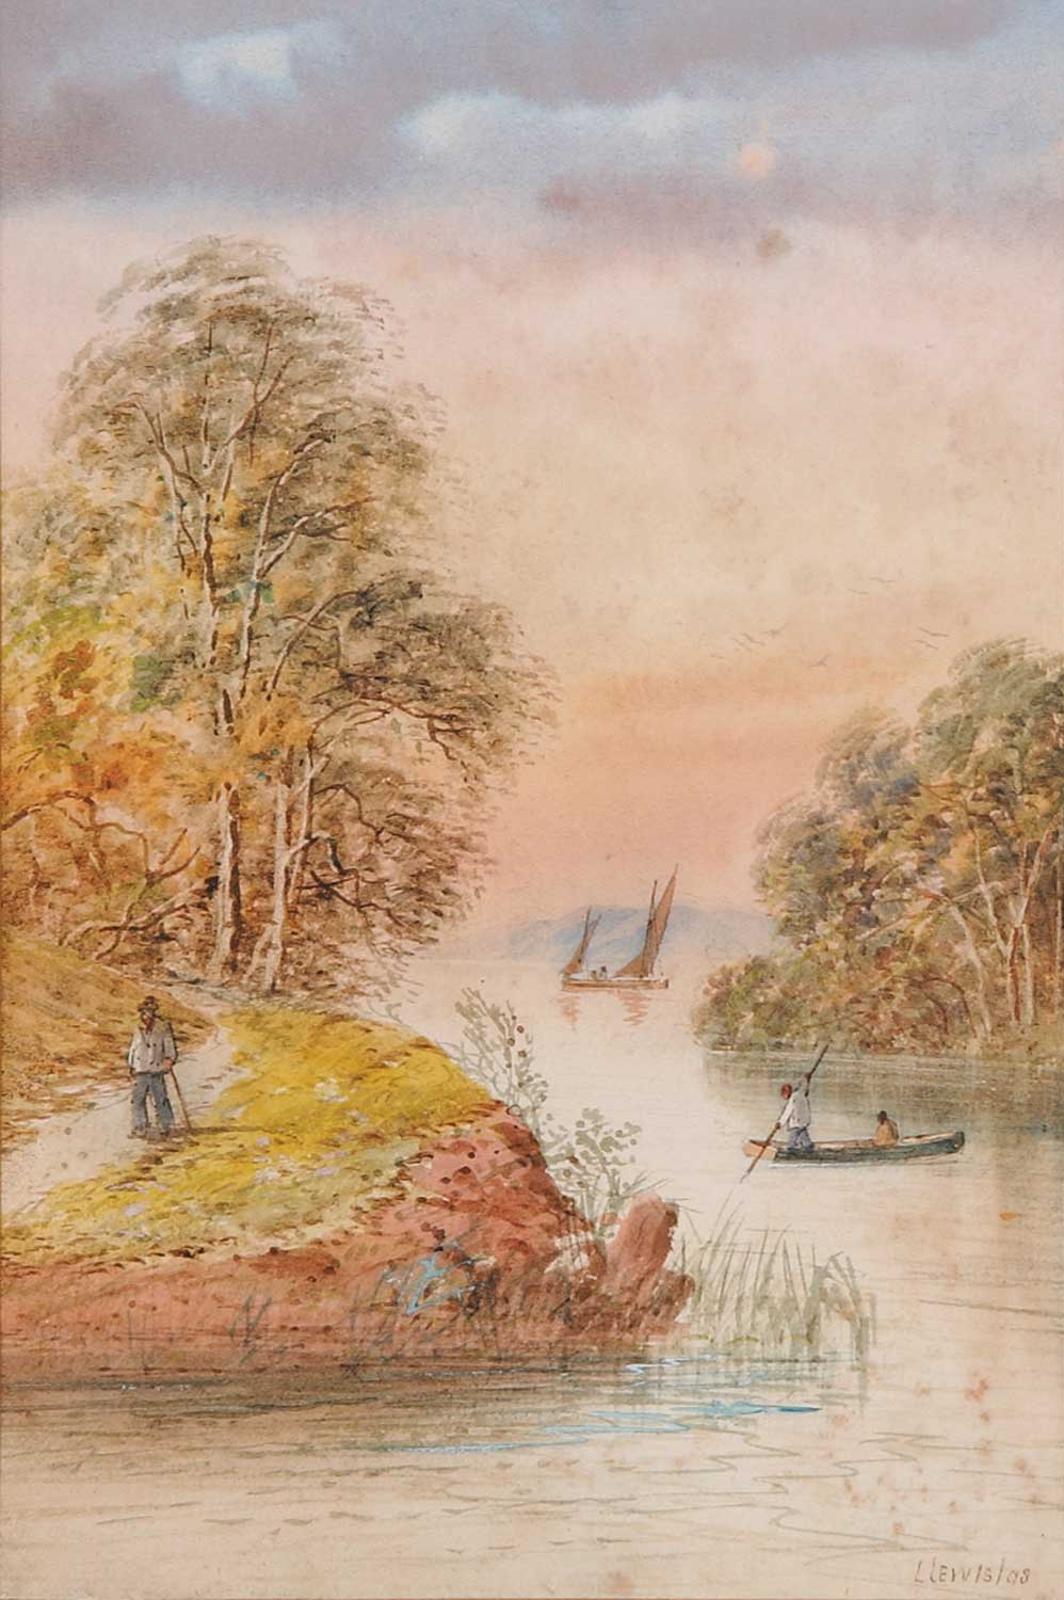 L. Lewis - Untitled - Men on a Path with Boats in the Distance